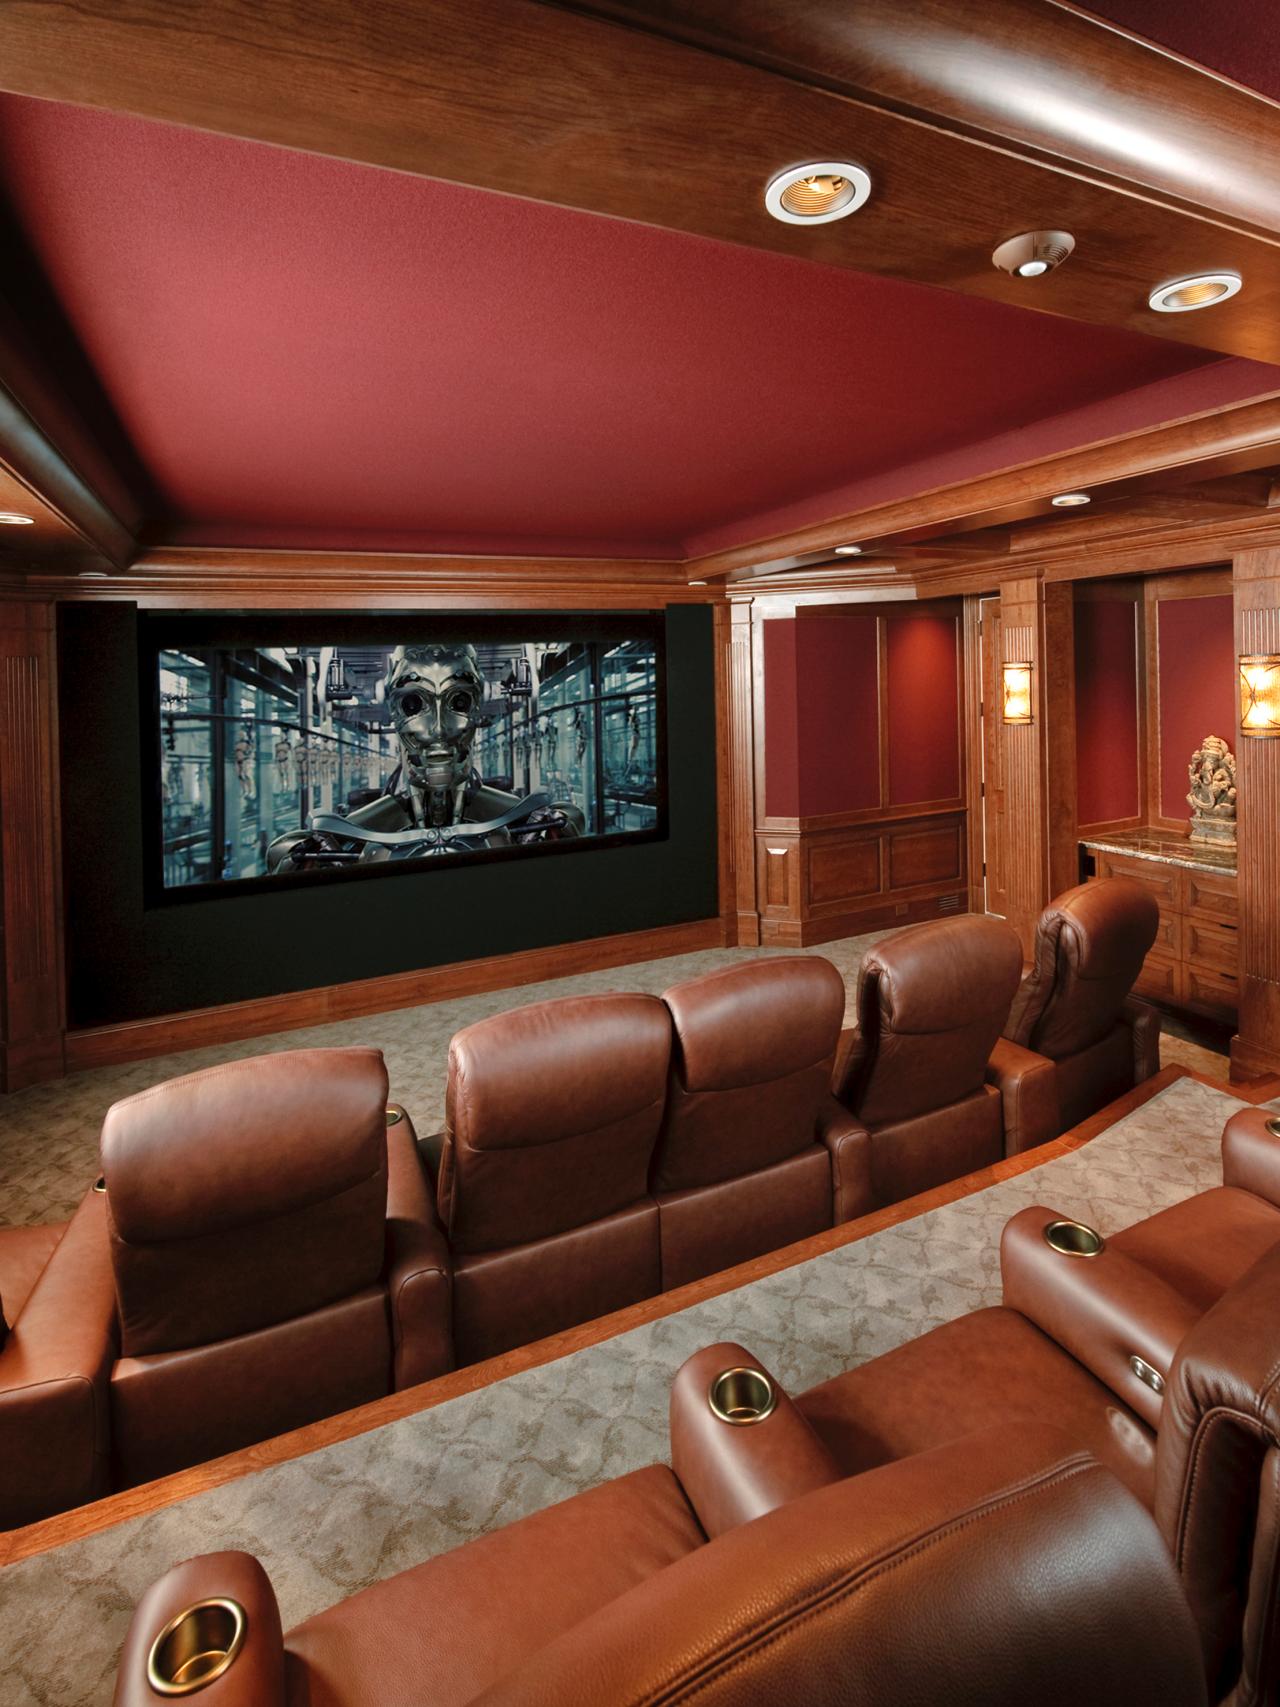 Home Theater Design Ideas: Pictures, Tips & Options